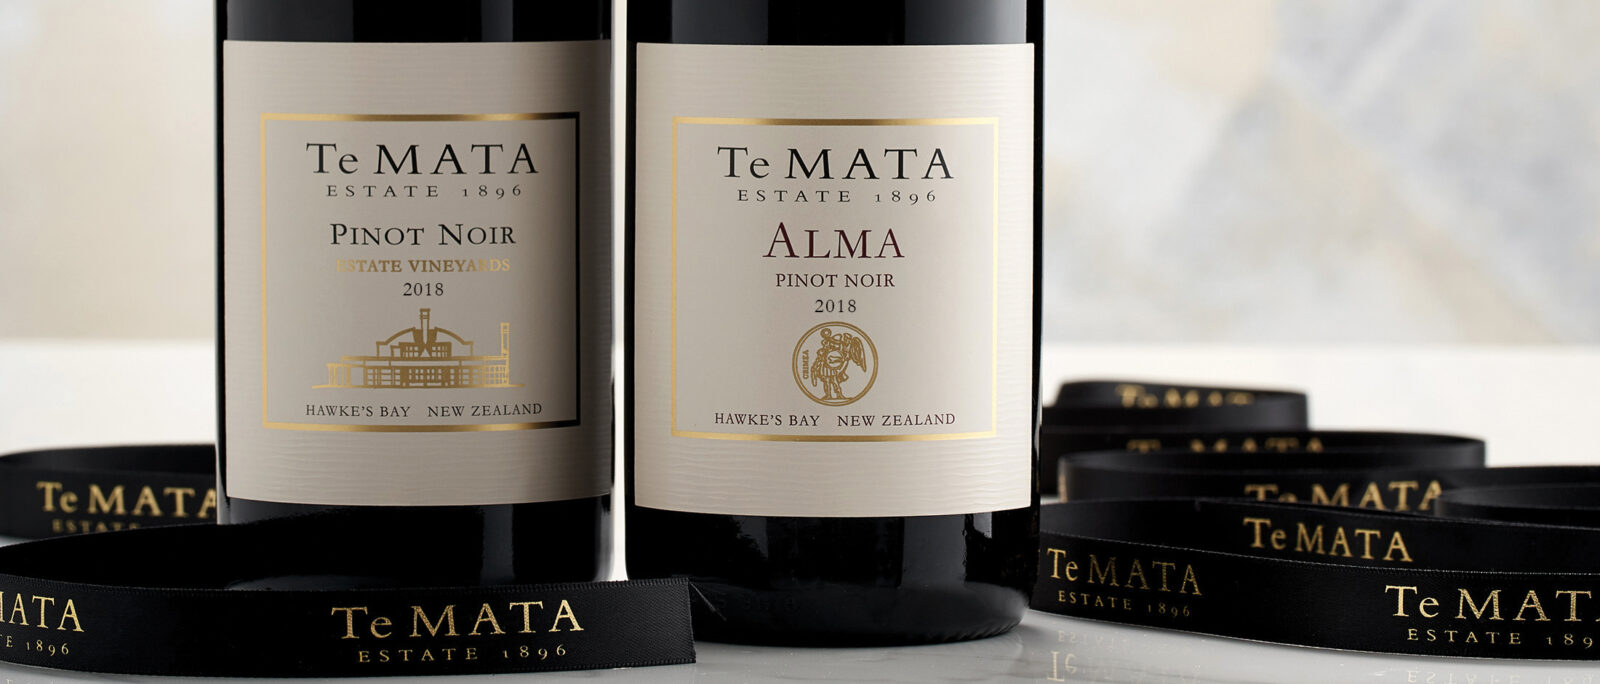 Two New Wines : Pinot Noir from Te Mata Estate – Just 20 Years in the Making